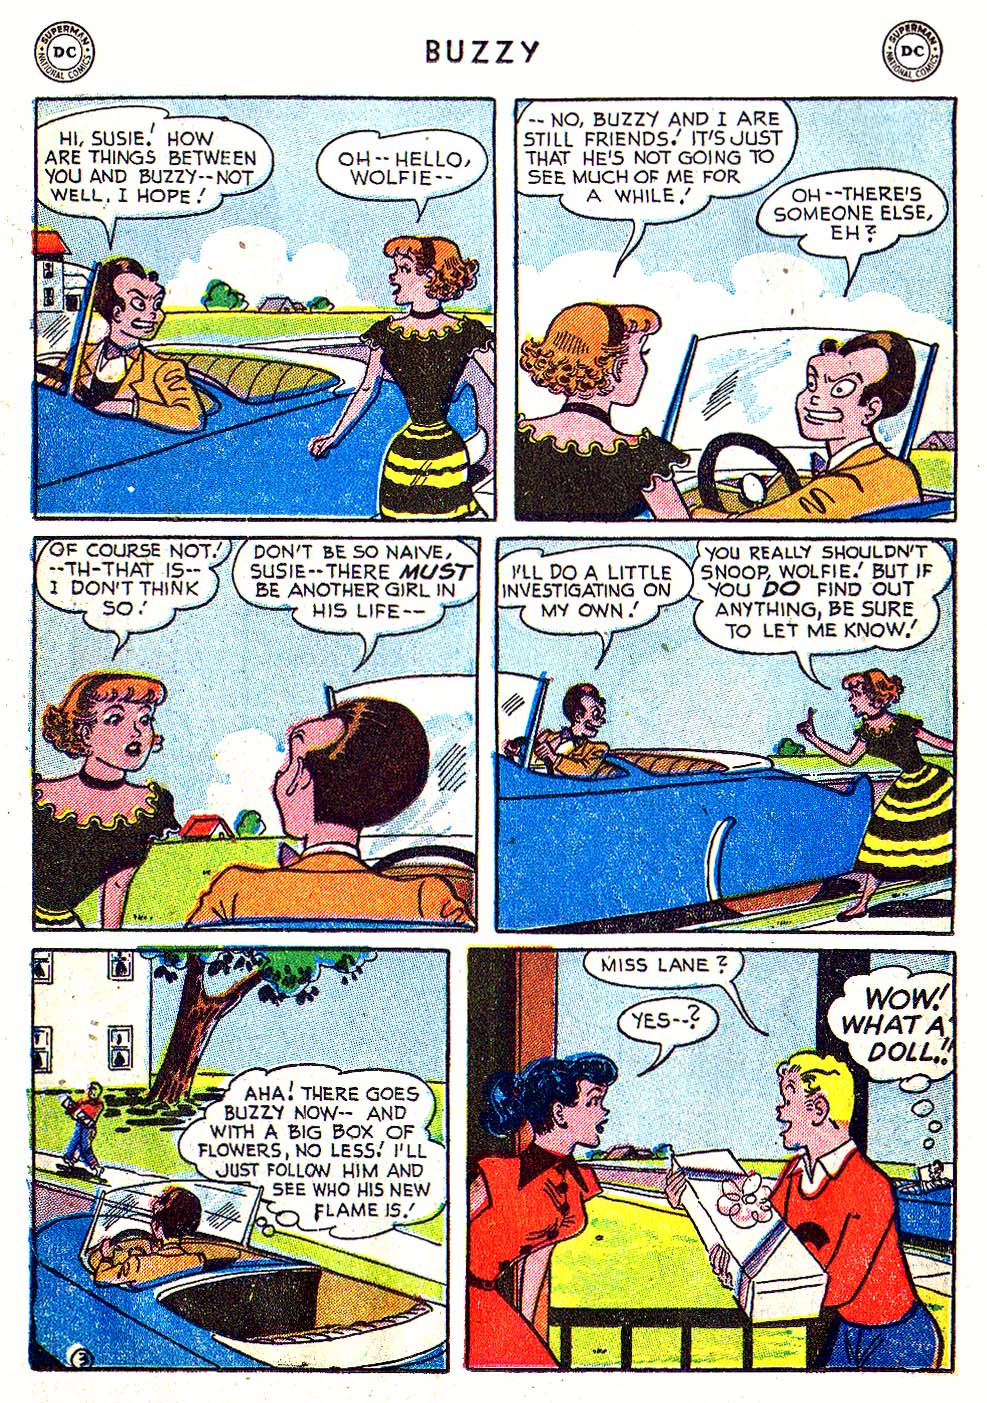 Read online Buzzy comic -  Issue #46 - 27